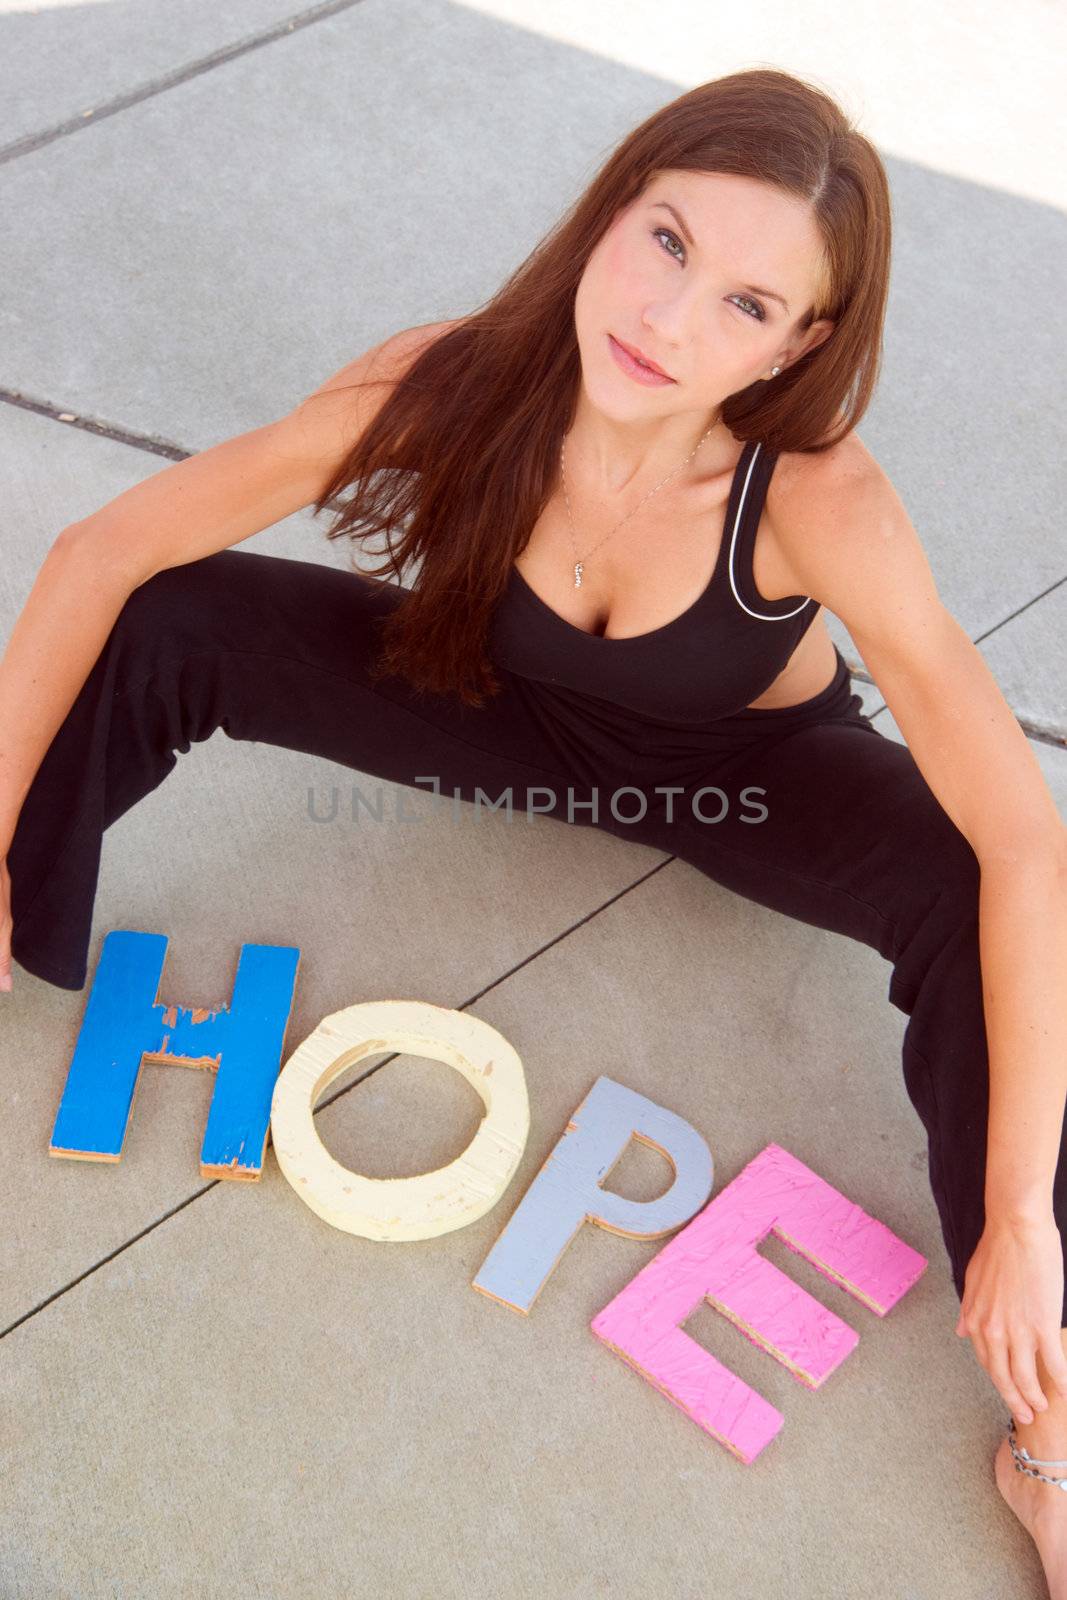 Hope by ChrisBoswell